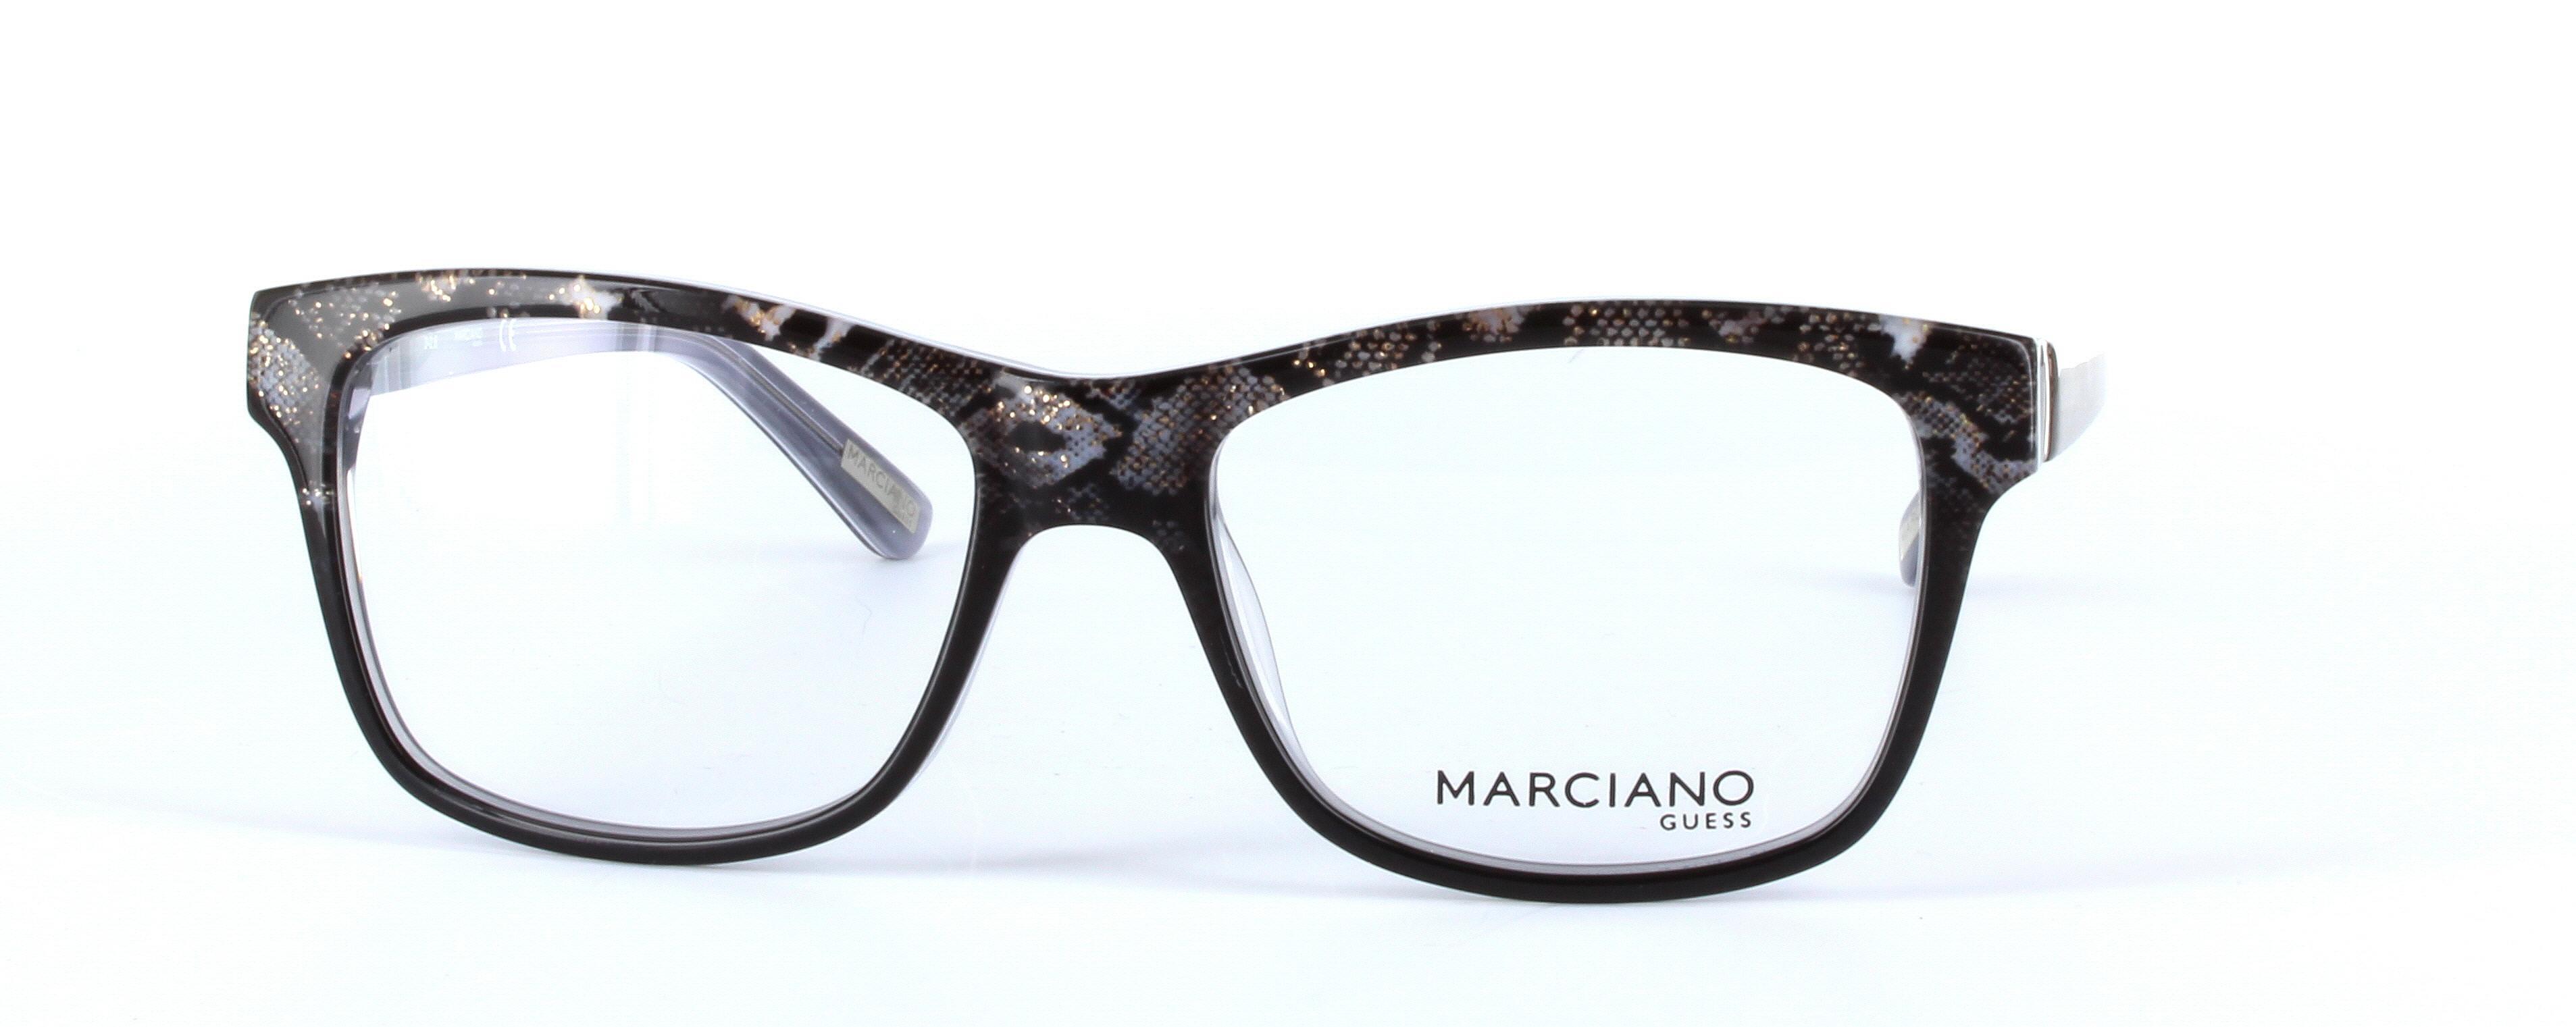 GUESS MARCIANO (GM0279-005) Black Full Rim Oval Rectangular Acetate Glasses - Image View 5